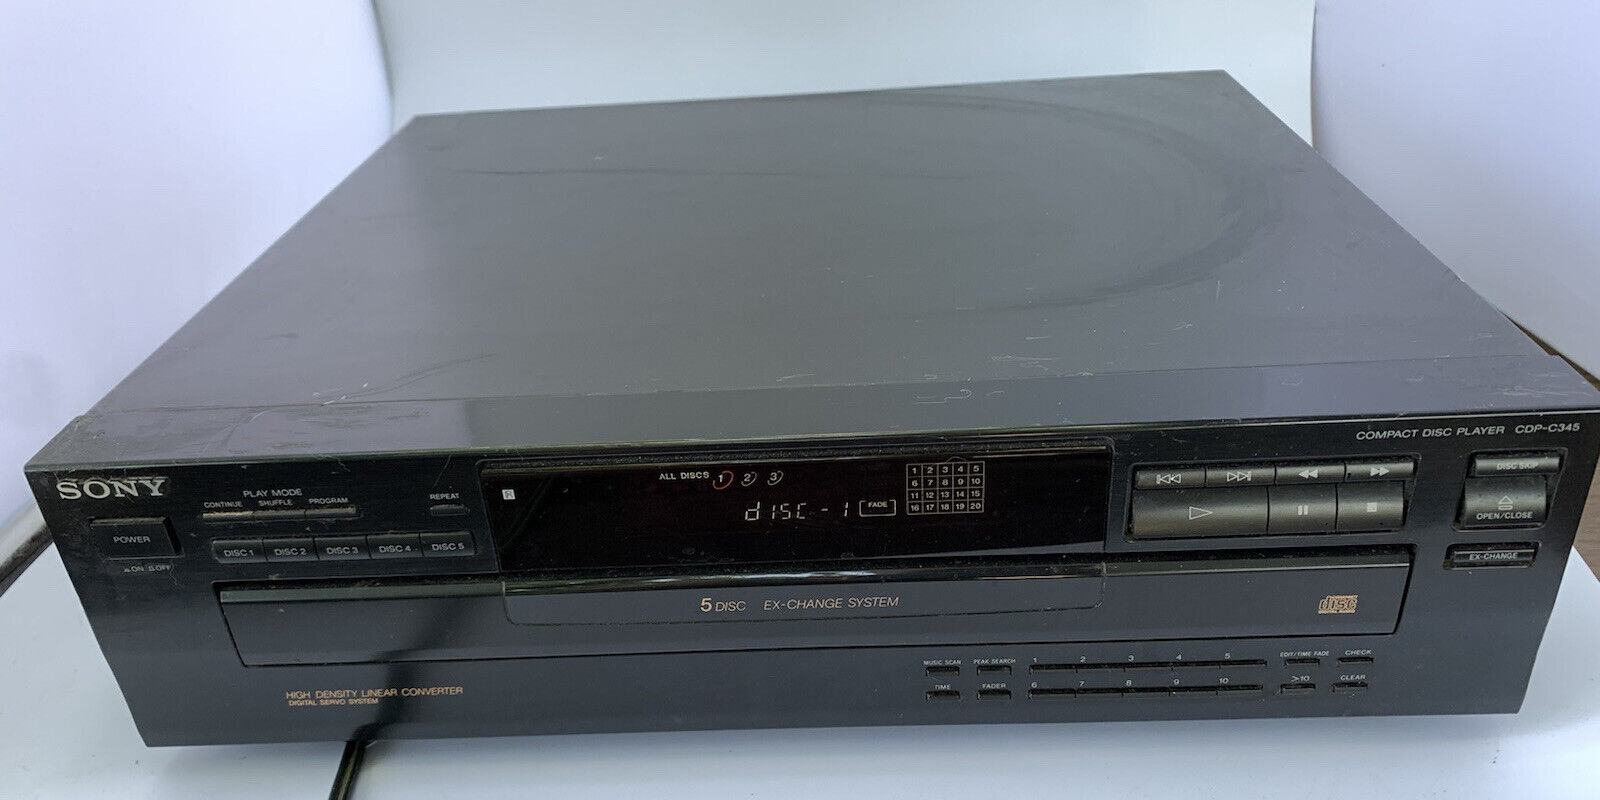 Sony Compact Disc Player Cdp-c345 5 Disc Cd Changer No Remote - Tested/working